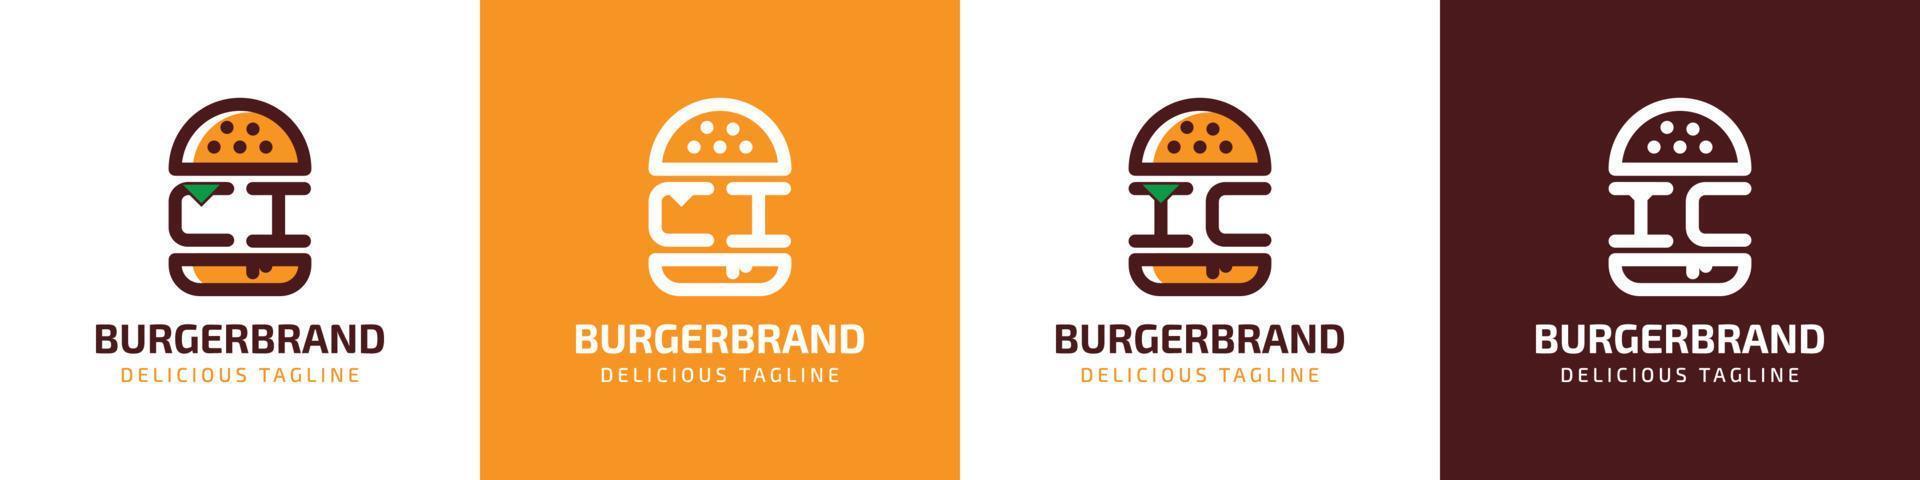 Letter CI and IC Burger Logo, suitable for any business related to burger with CI or IC initials. vector